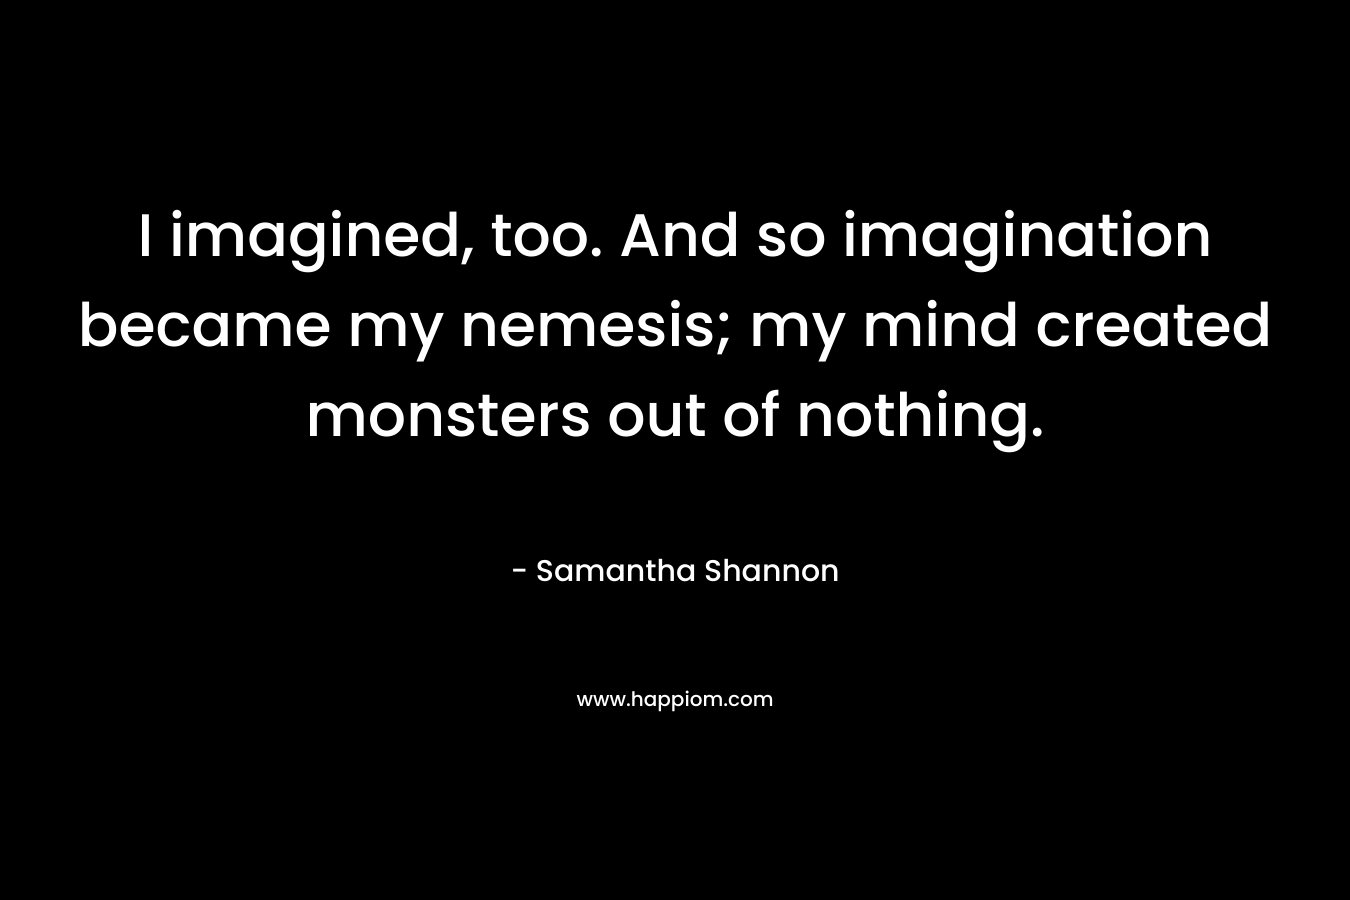 I imagined, too. And so imagination became my nemesis; my mind created monsters out of nothing. – Samantha Shannon